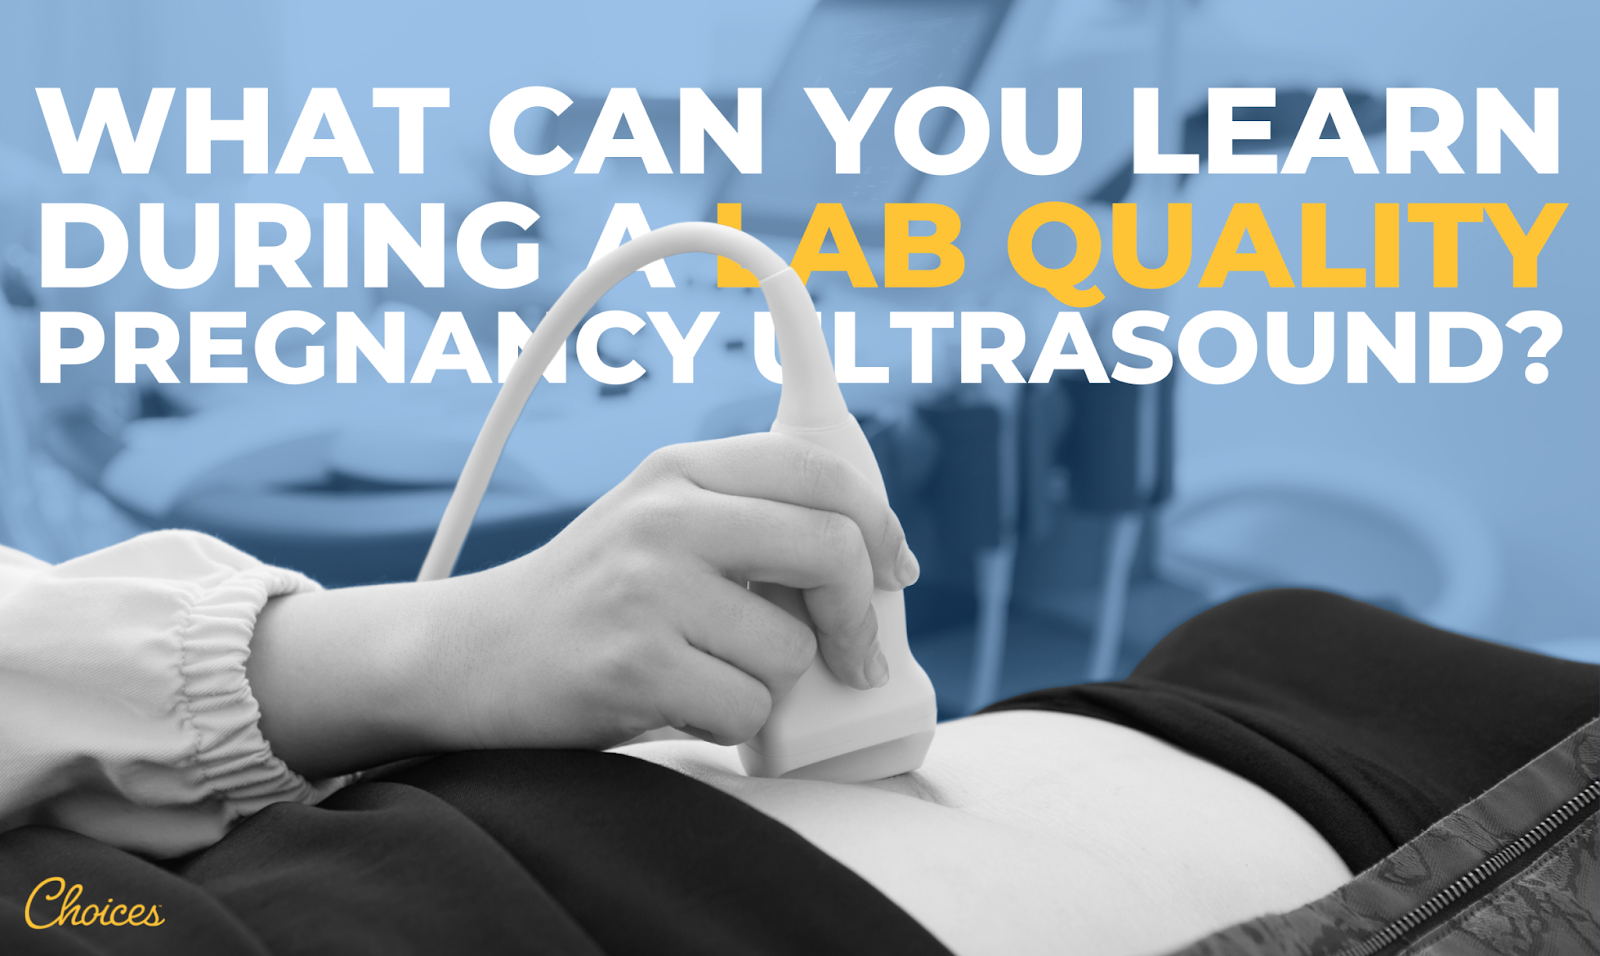 What Can You Learn During a Lab Quality Pregnancy Ultrasound?